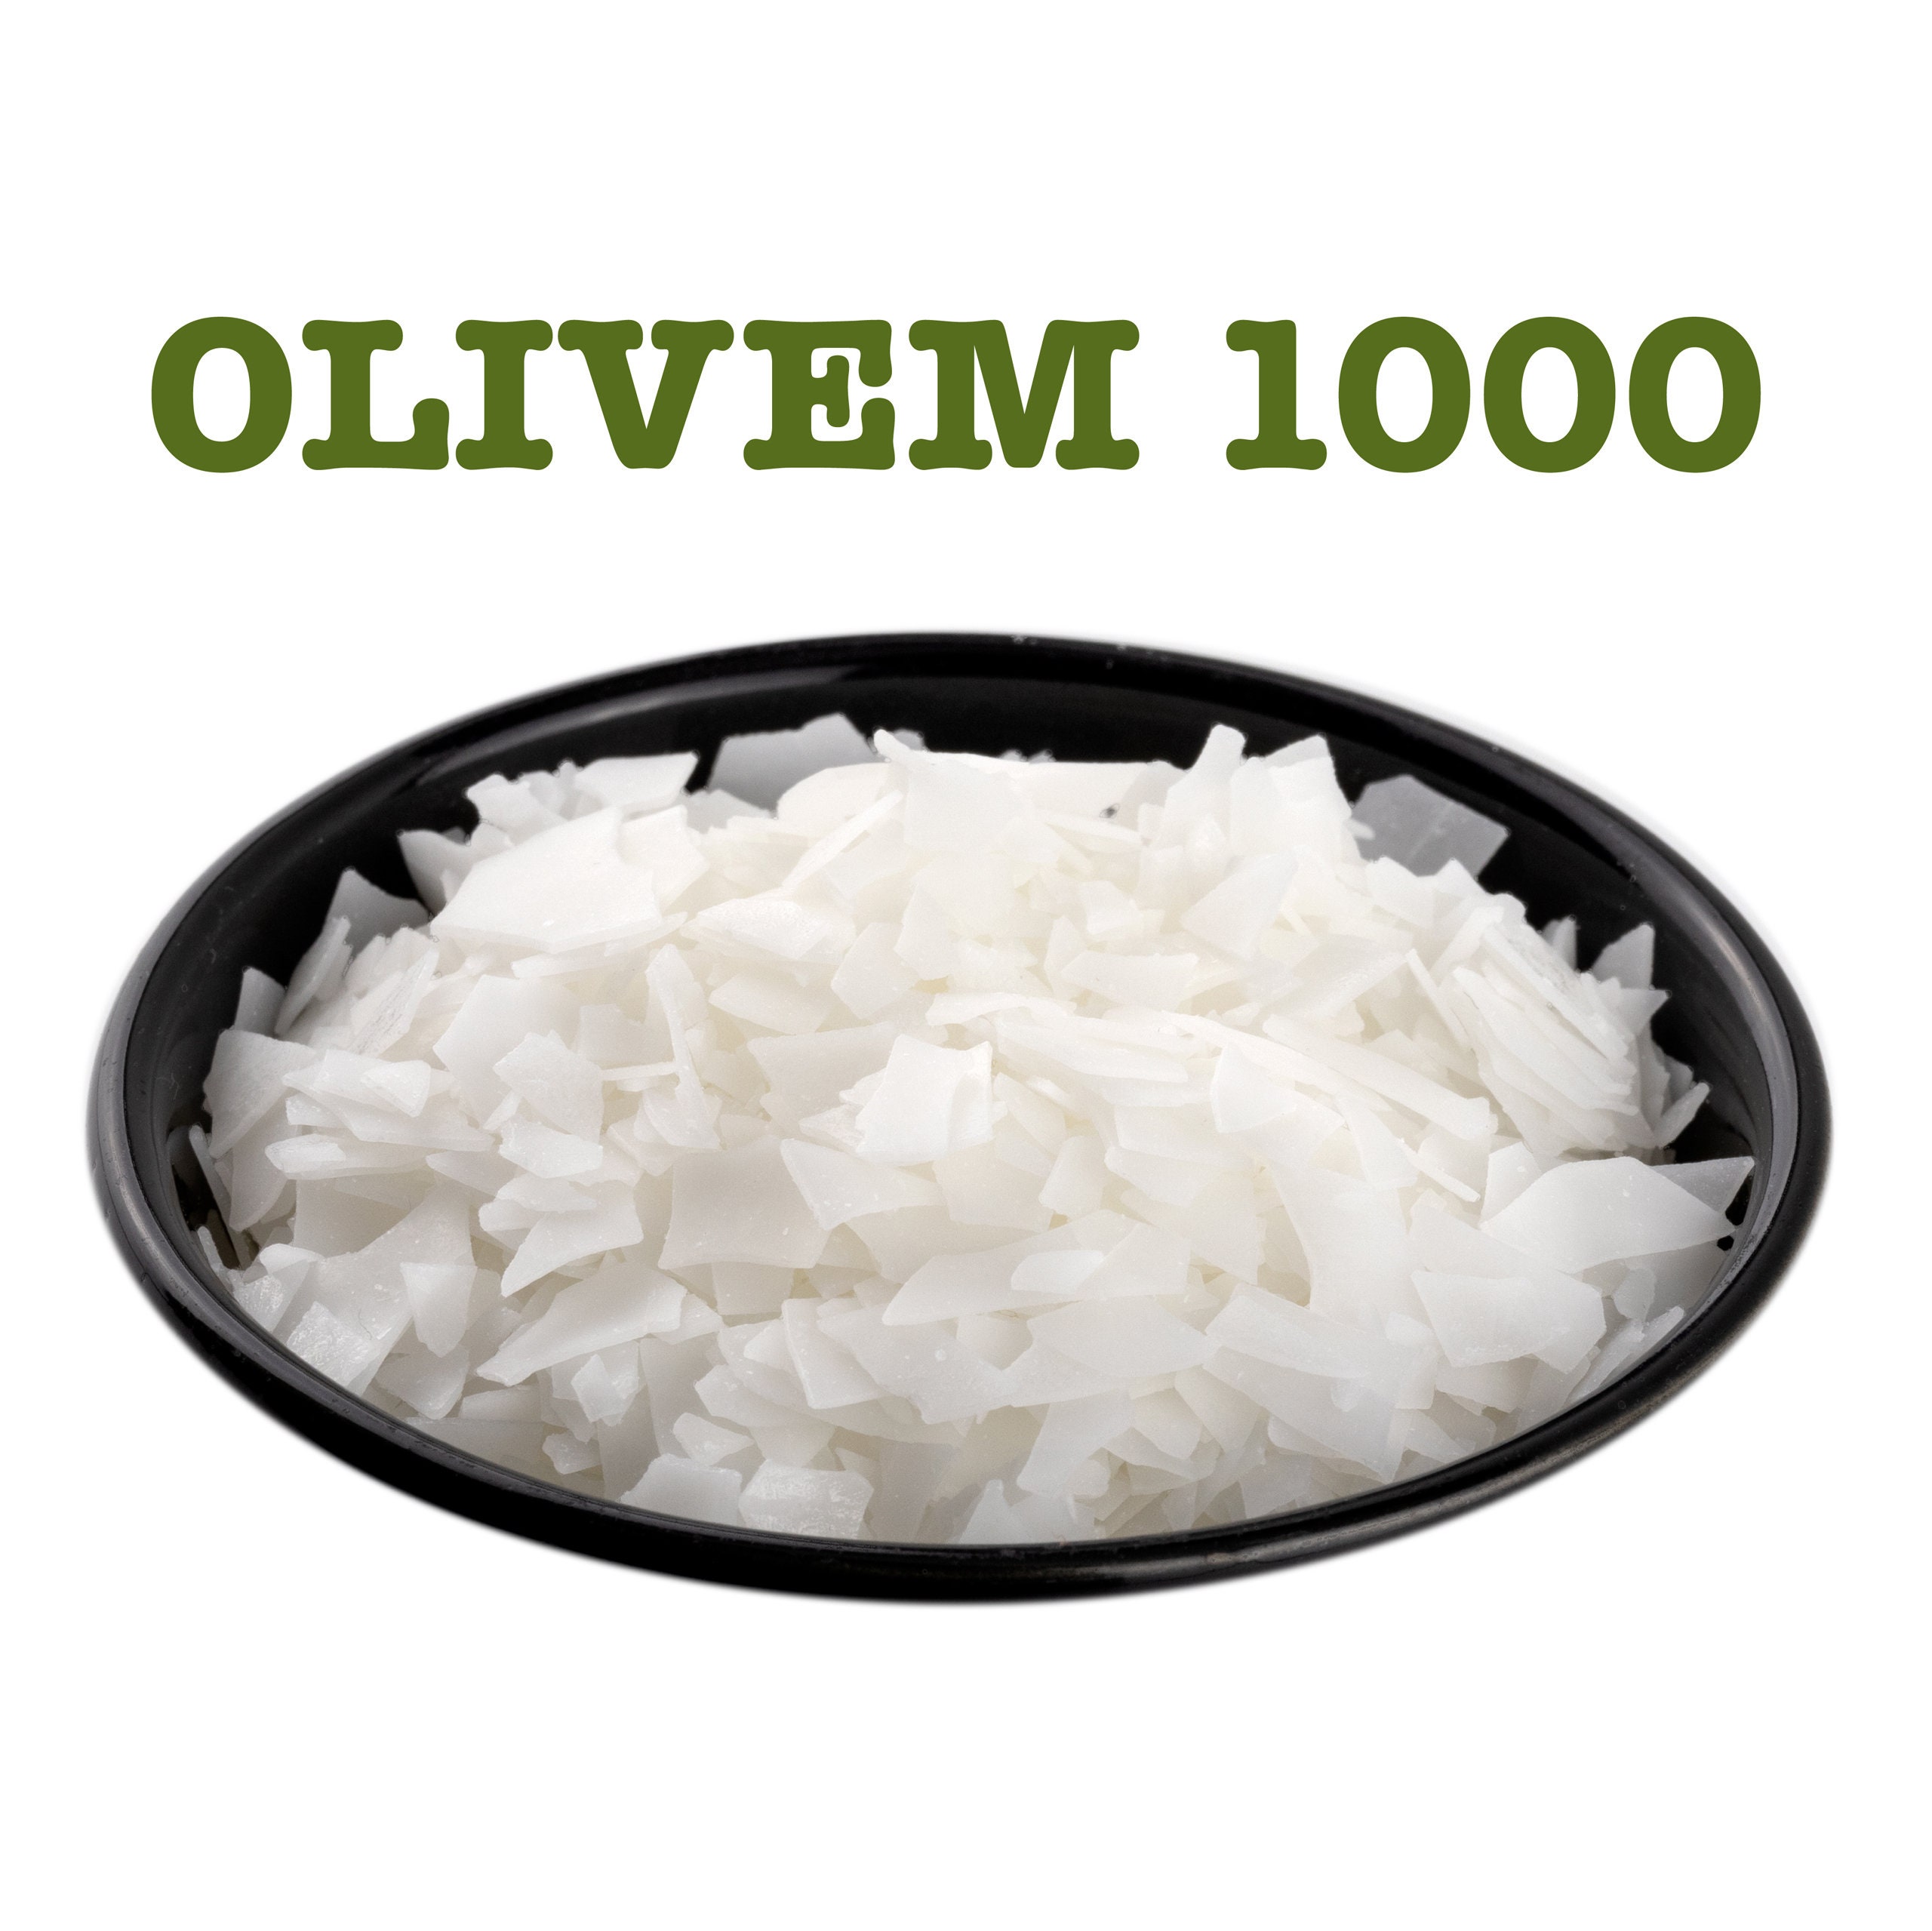 How to make an emulsion with Olivem 900